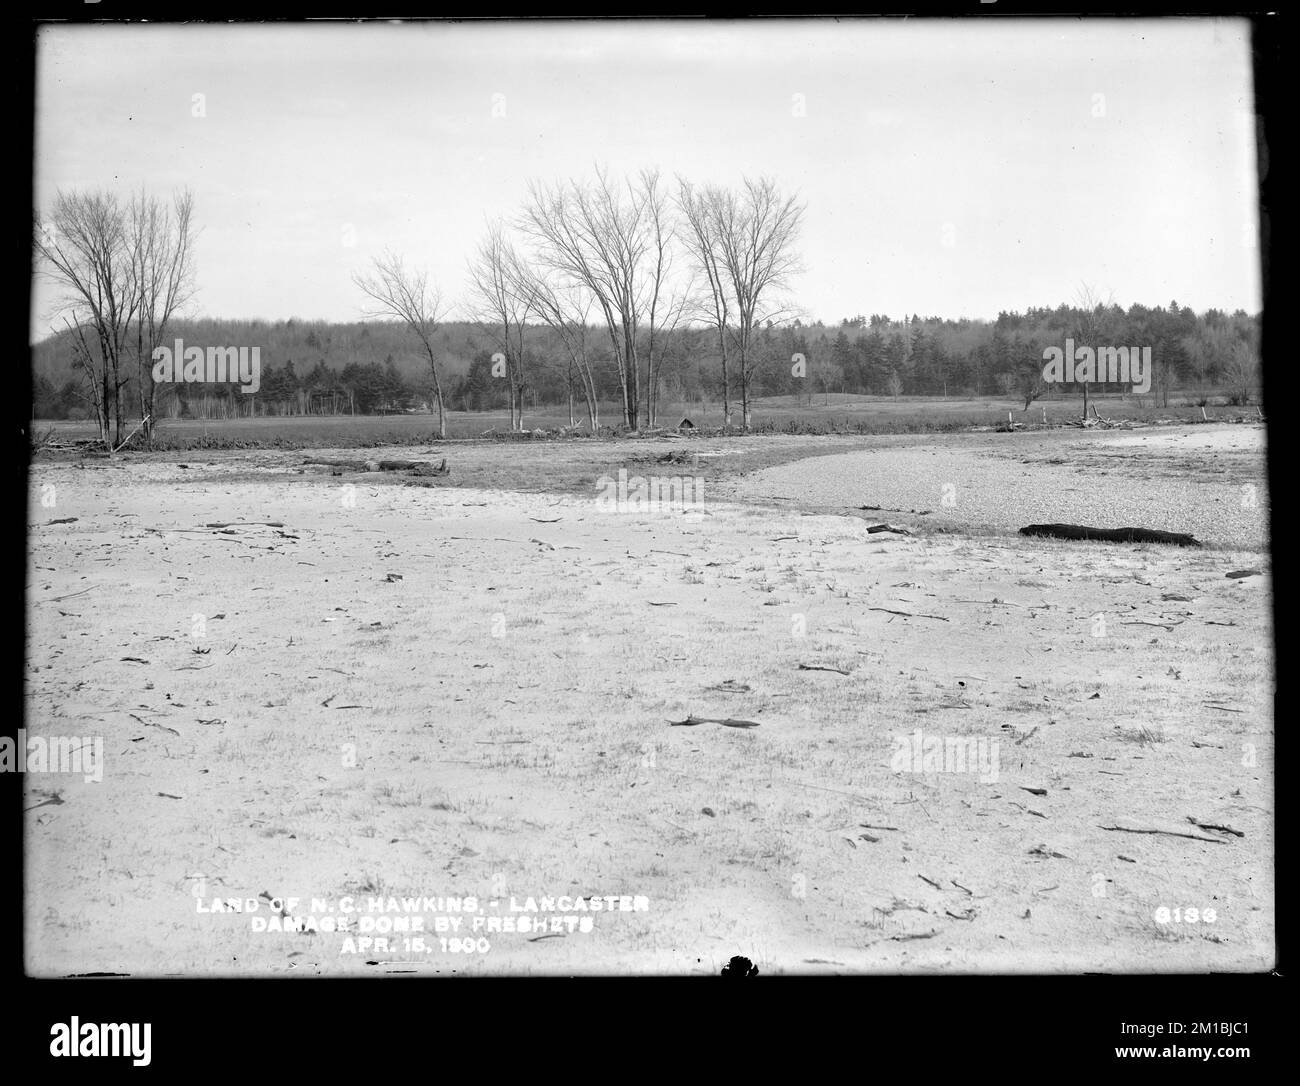 Wachusett Reservoir, N. C. Hawkins' land, damage done by freshets, Lancaster, Mass., Apr. 15, 1900 , waterworks, reservoirs water distribution structures, watershed sanitary improvement Stock Photo